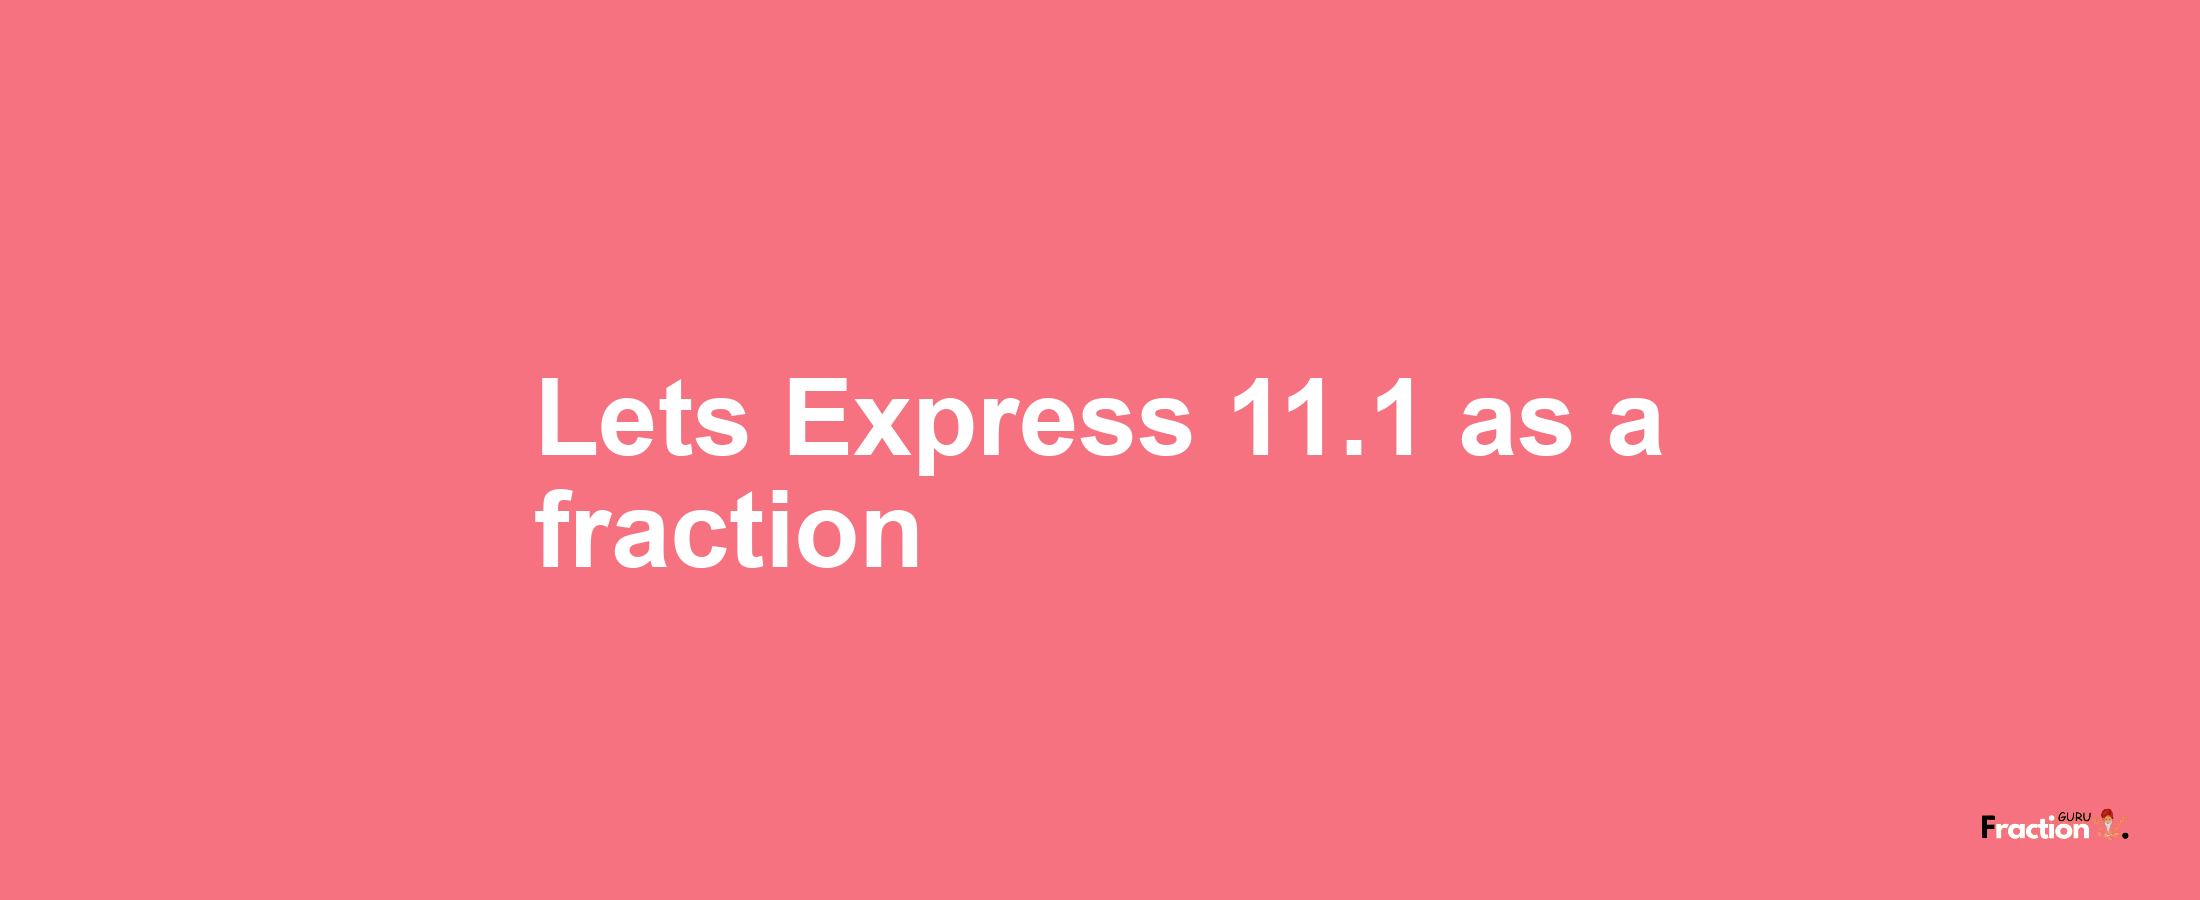 Lets Express 11.1 as afraction